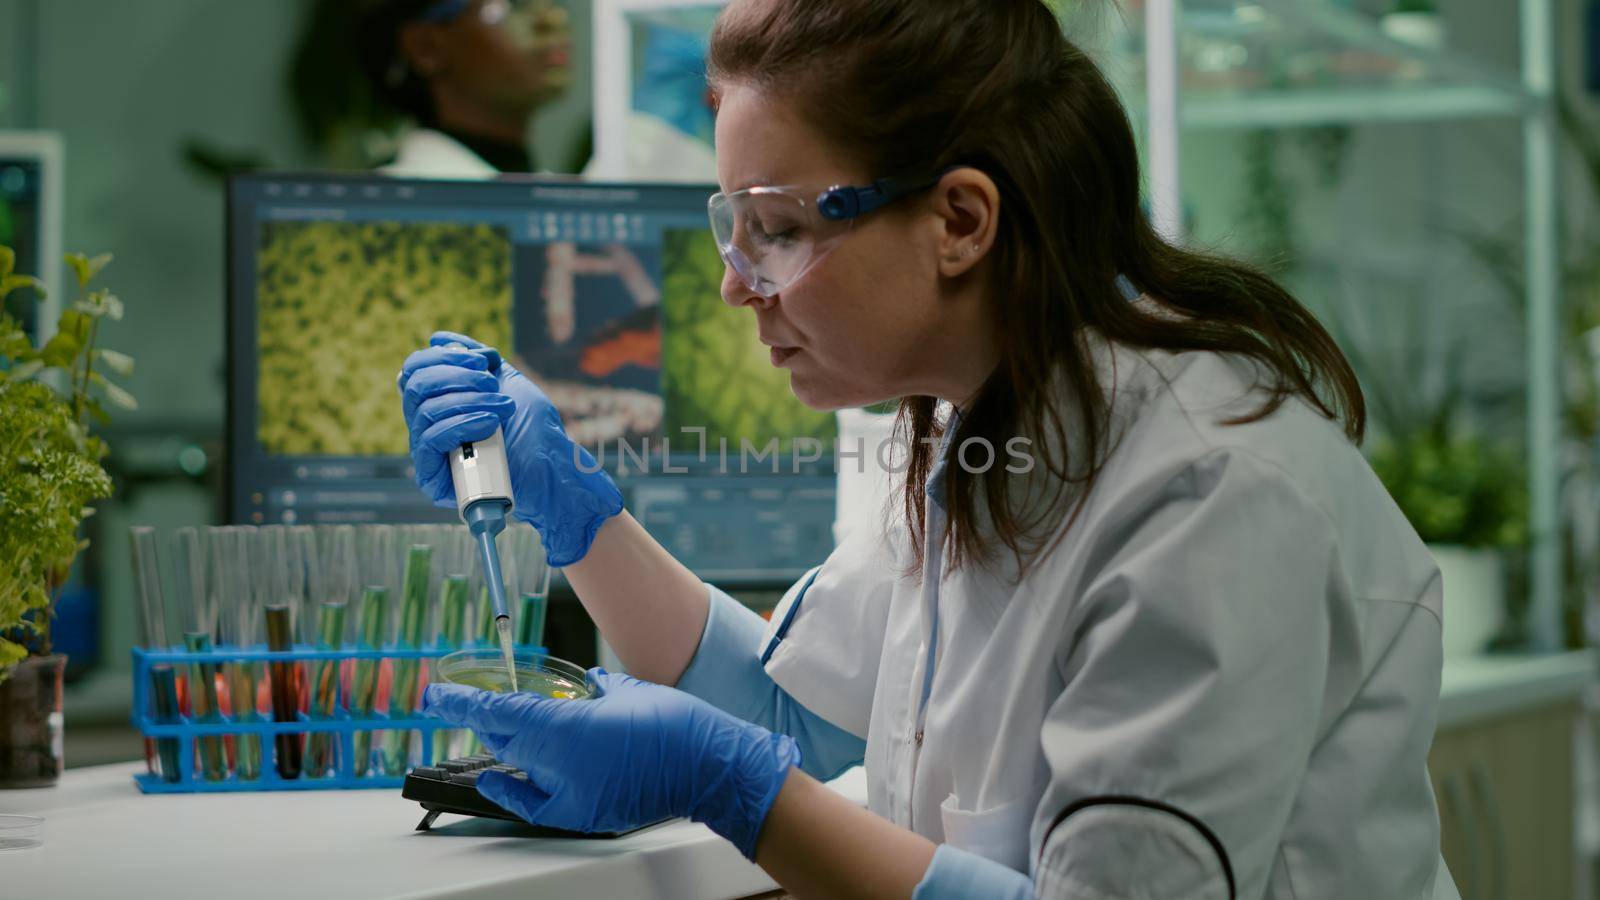 Biologist researcher using micropipette and petri dish to discovering gmo solution. Scientist chemist woman analyzing medical expertise working in pharmaceutical laboratory